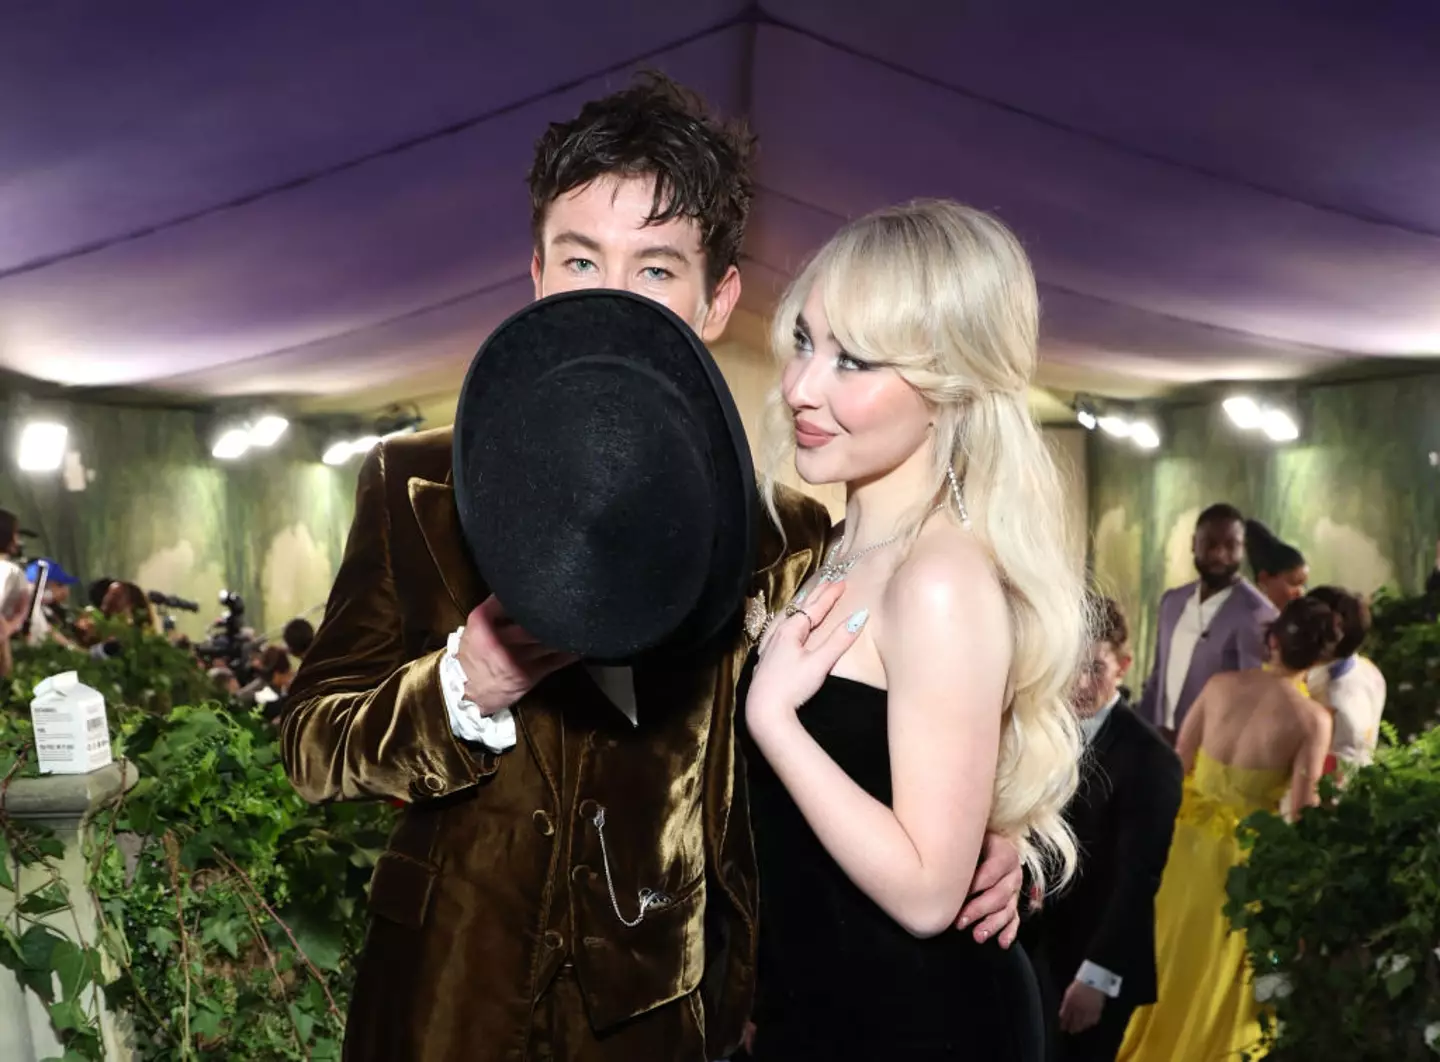 Barry Keoghan and Sabrina Carpenter. (Kevin Mazur/MG24/Getty Images for The Met Museum/Vogue)